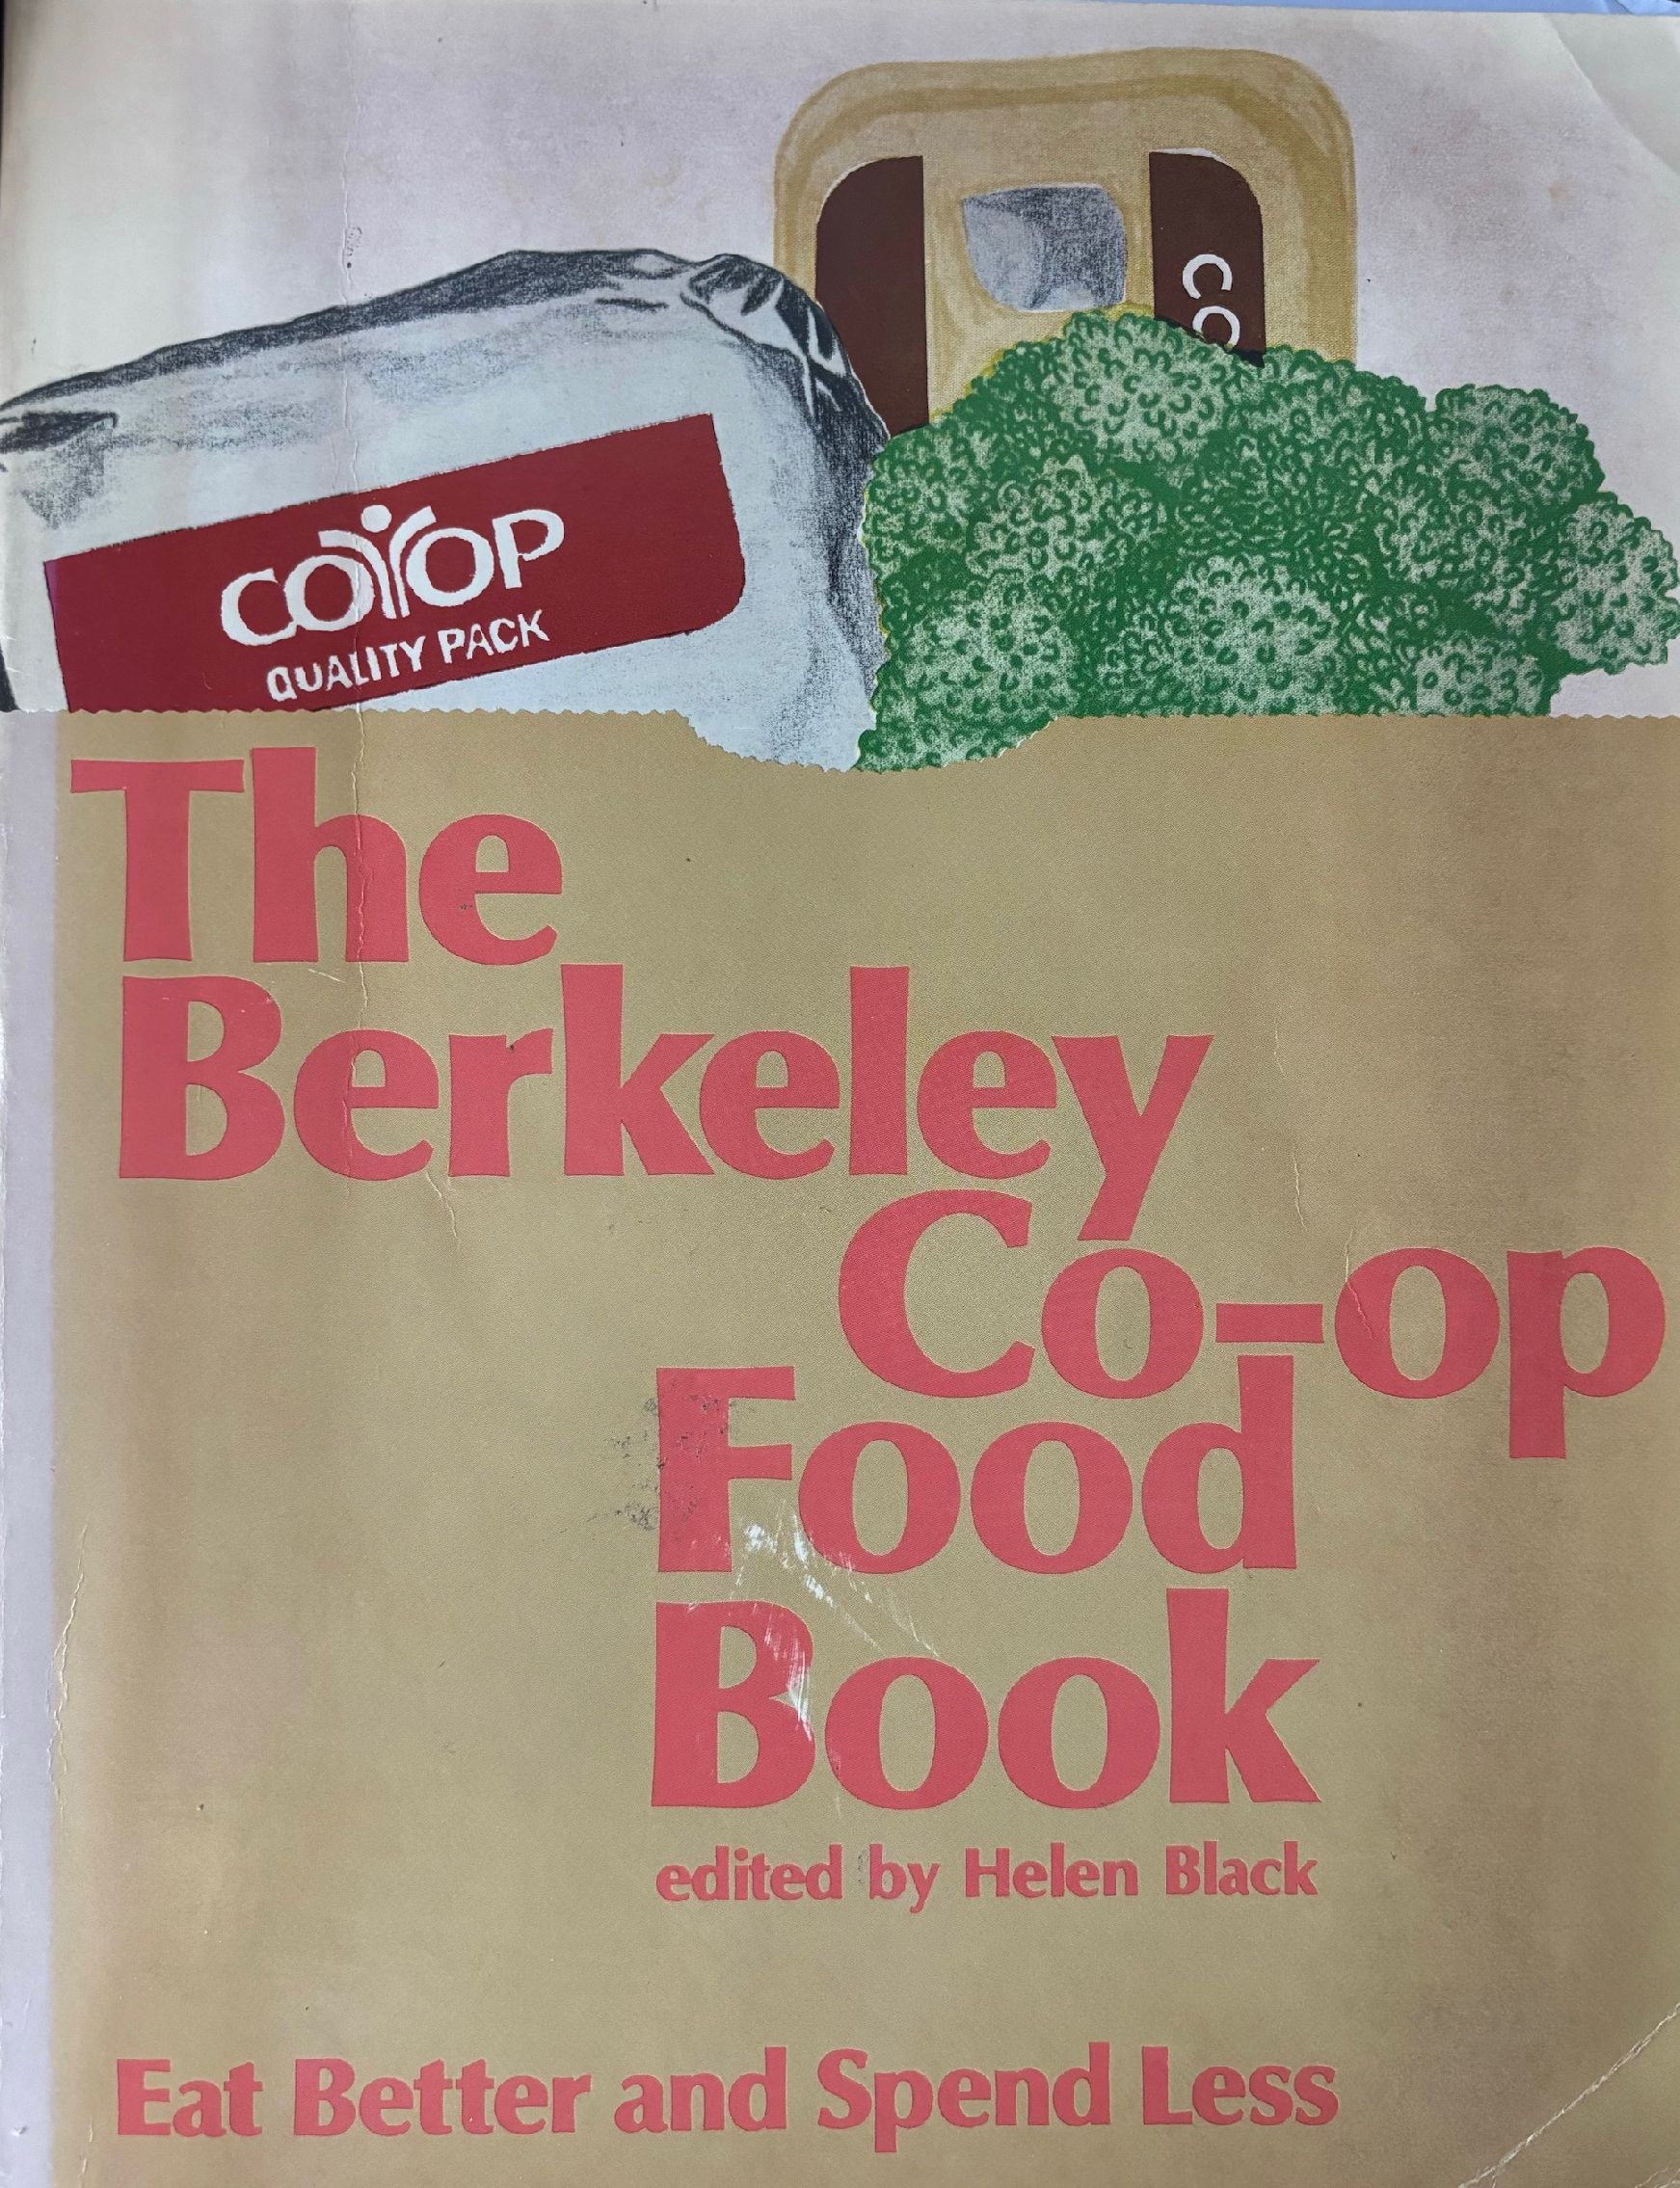 (*NEW ARRIVAL*) (Hippie) Helen Black, ed. The Berkeley Co-op Food Book: Eat Better and Spend Less